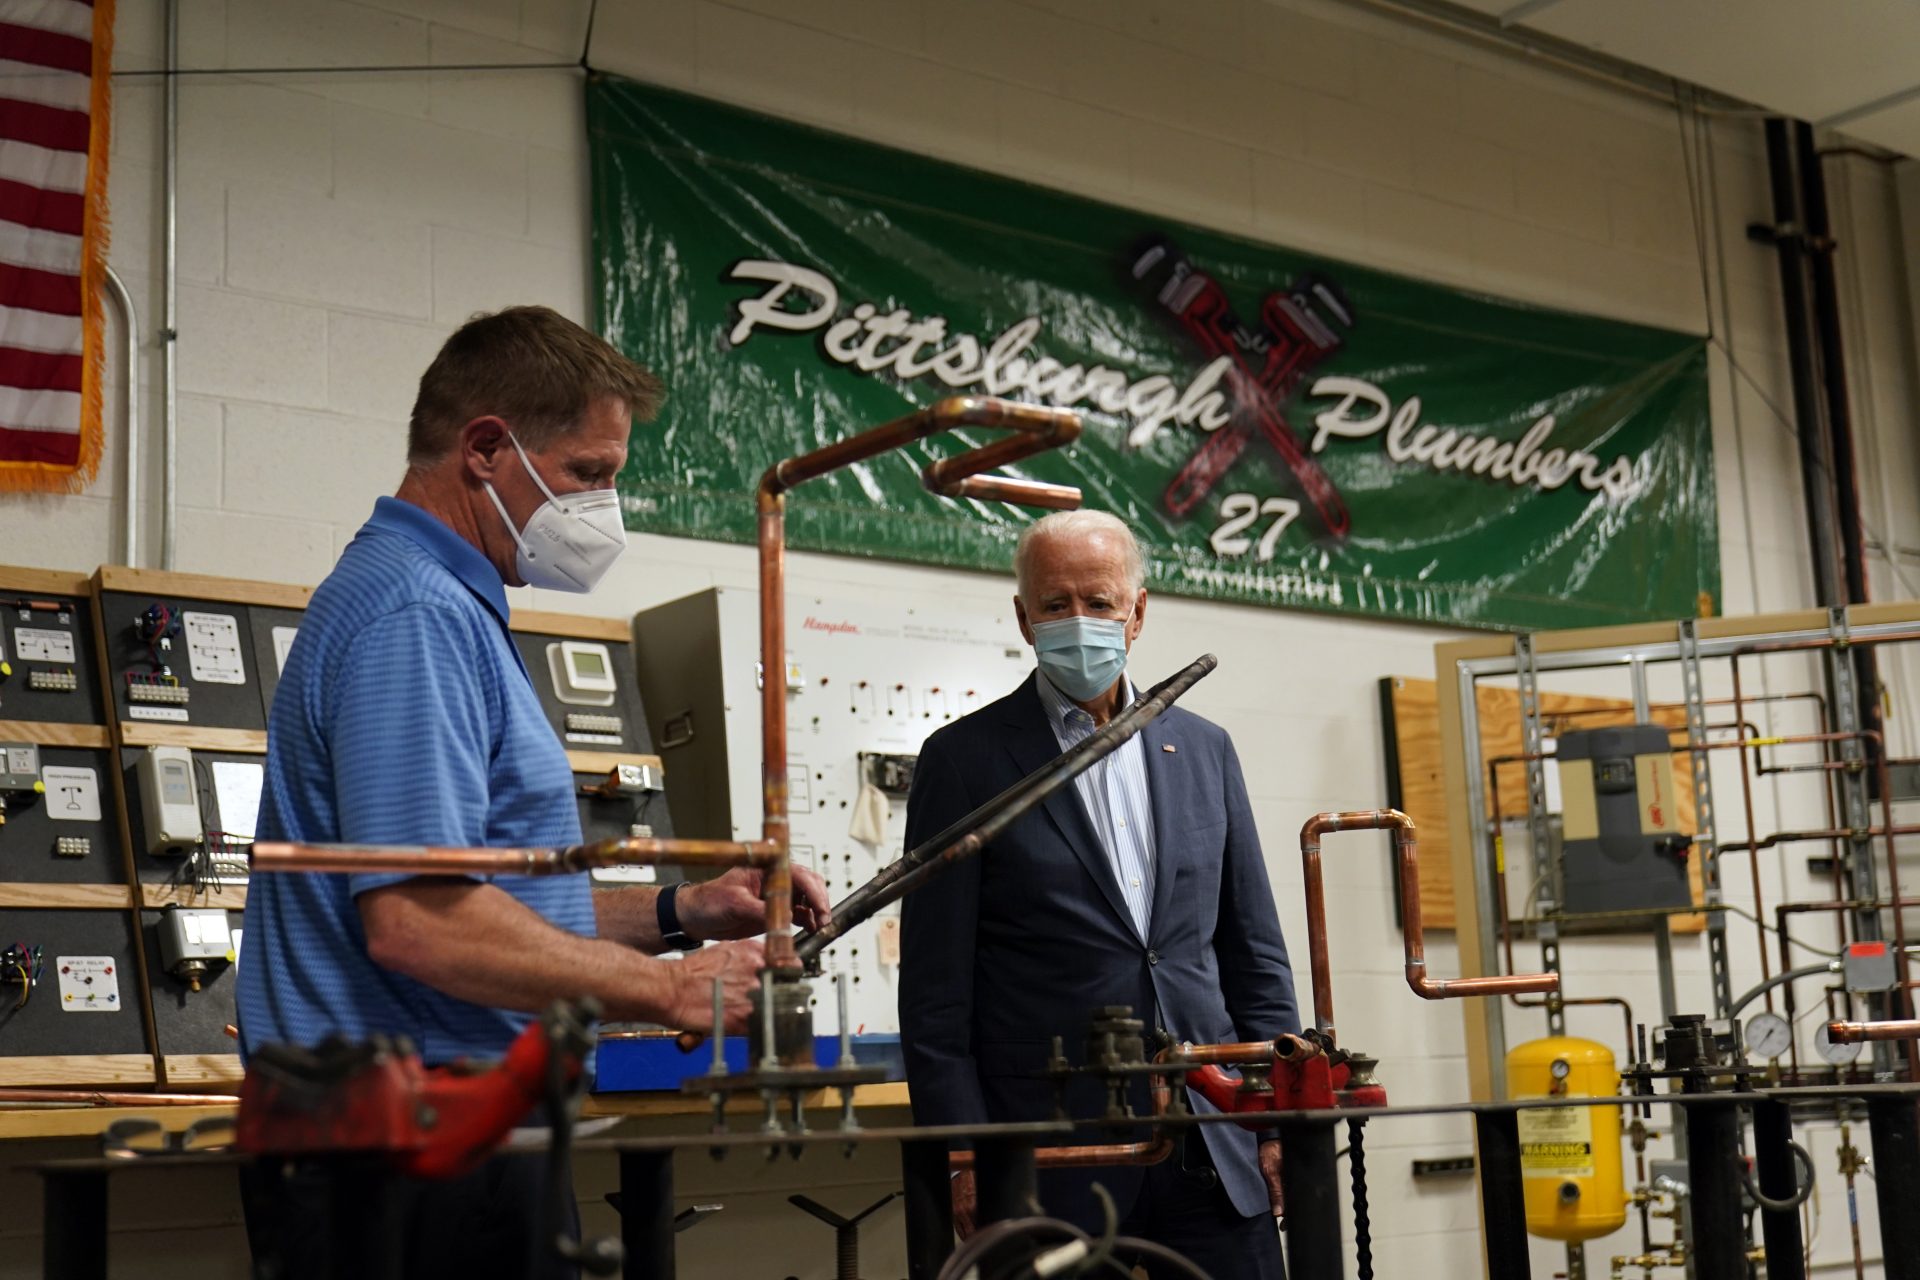 Democratic presidential candidate former Vice President Joe Biden visits the Plumbers Local Union No. 27 training center, Saturday, Oct. 10, 2020, in Erie, Pa.